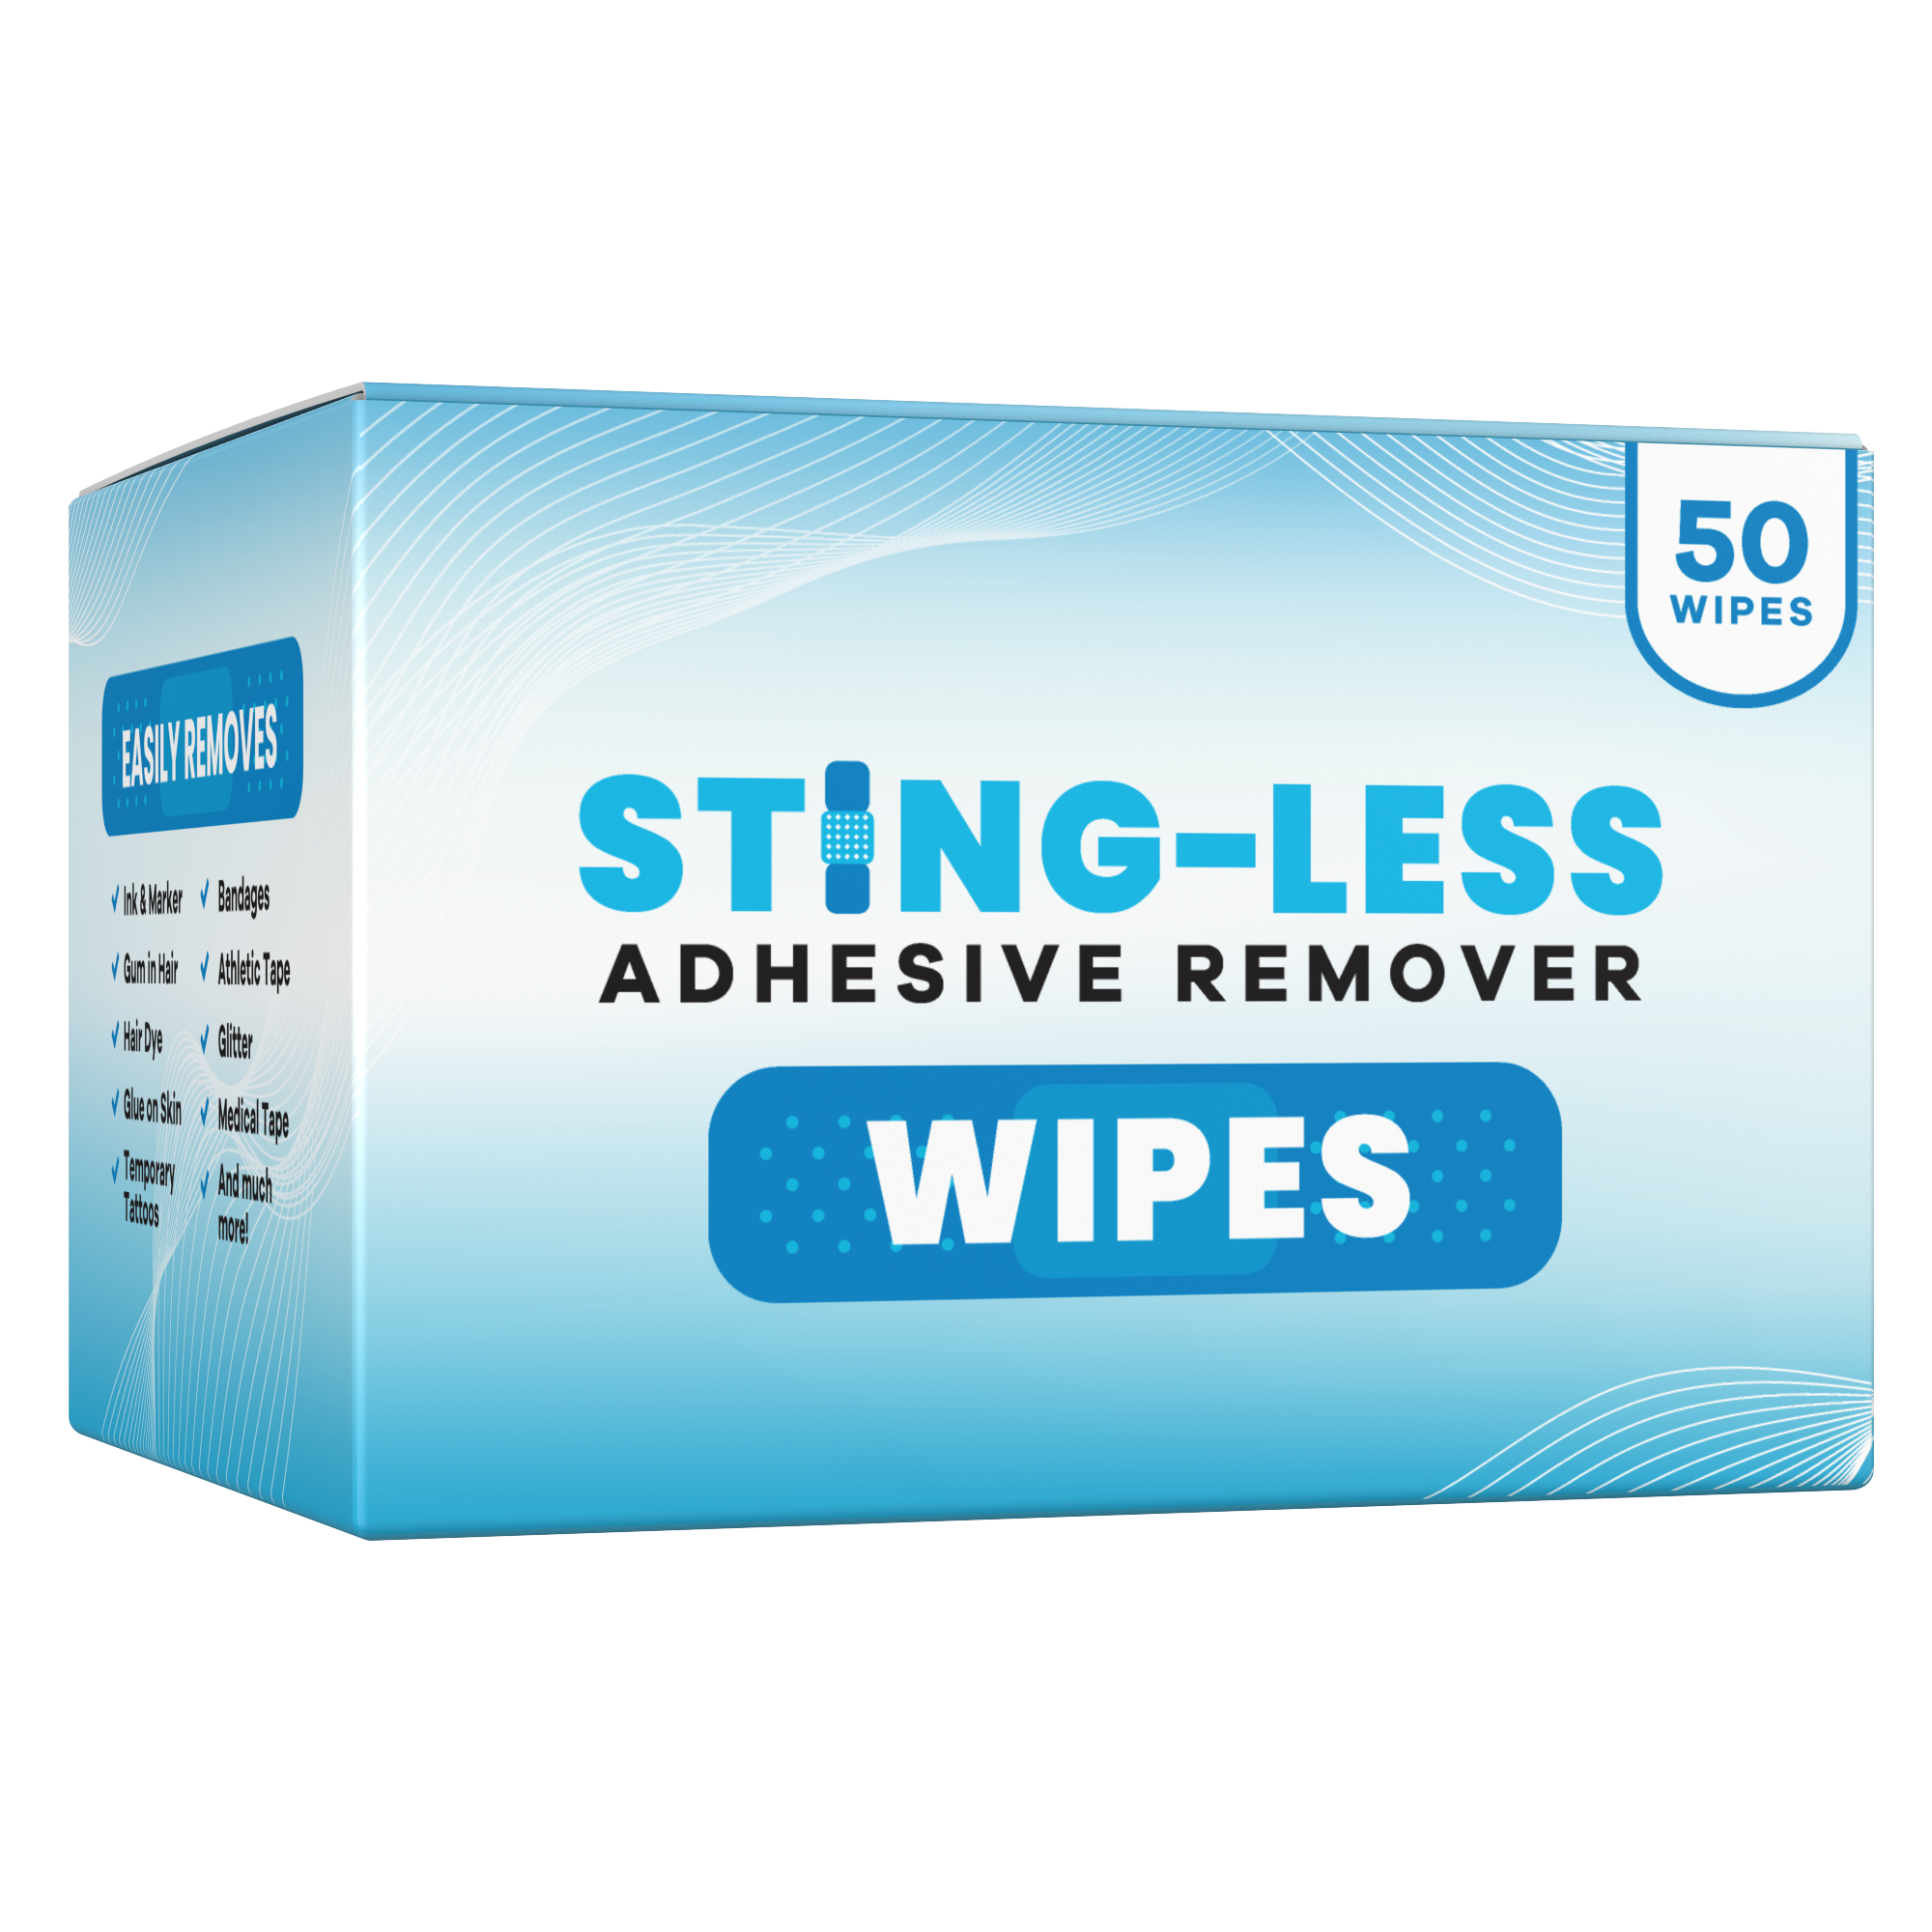 Adhesive Remover Wipes for Skin - Stingless Adhesive Remover – Sting-Less Adhesive  Remover